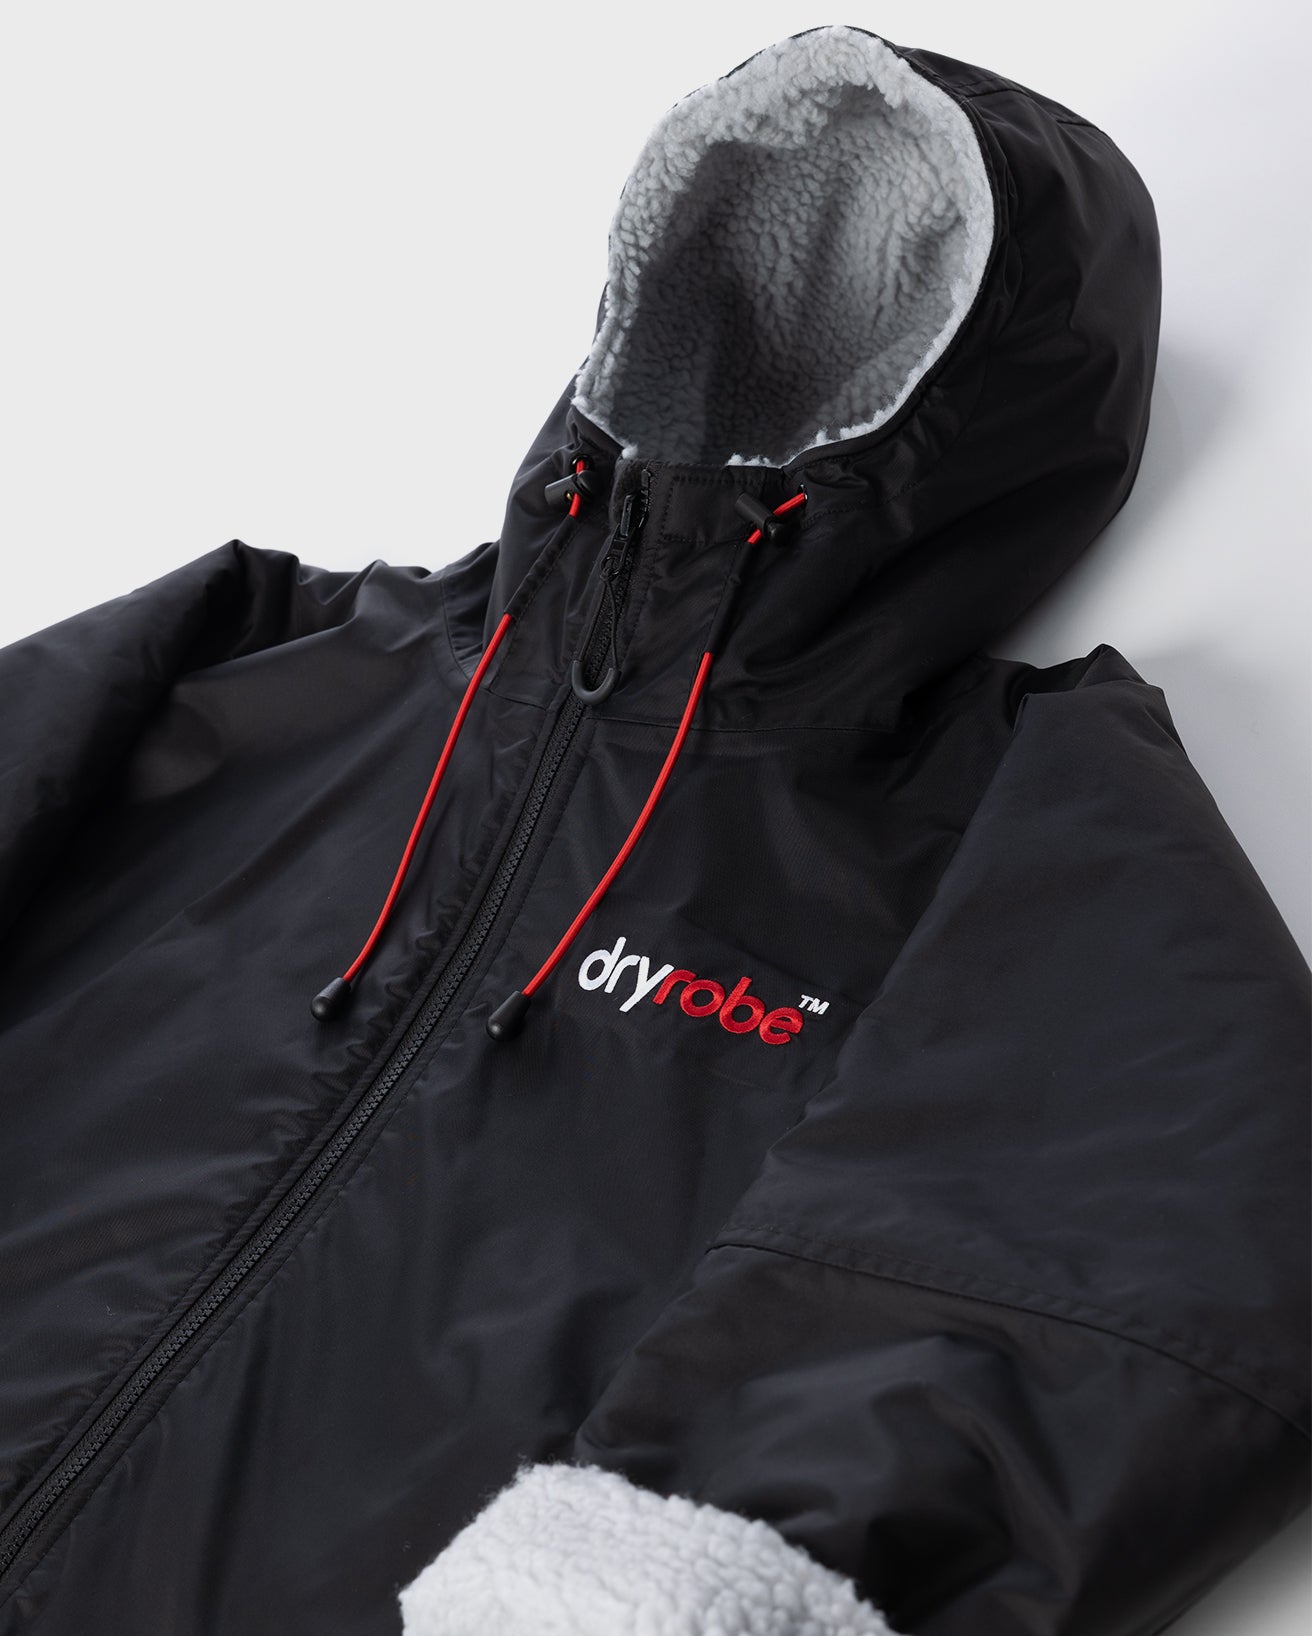 dryrobe® Adapt hood with draw cords